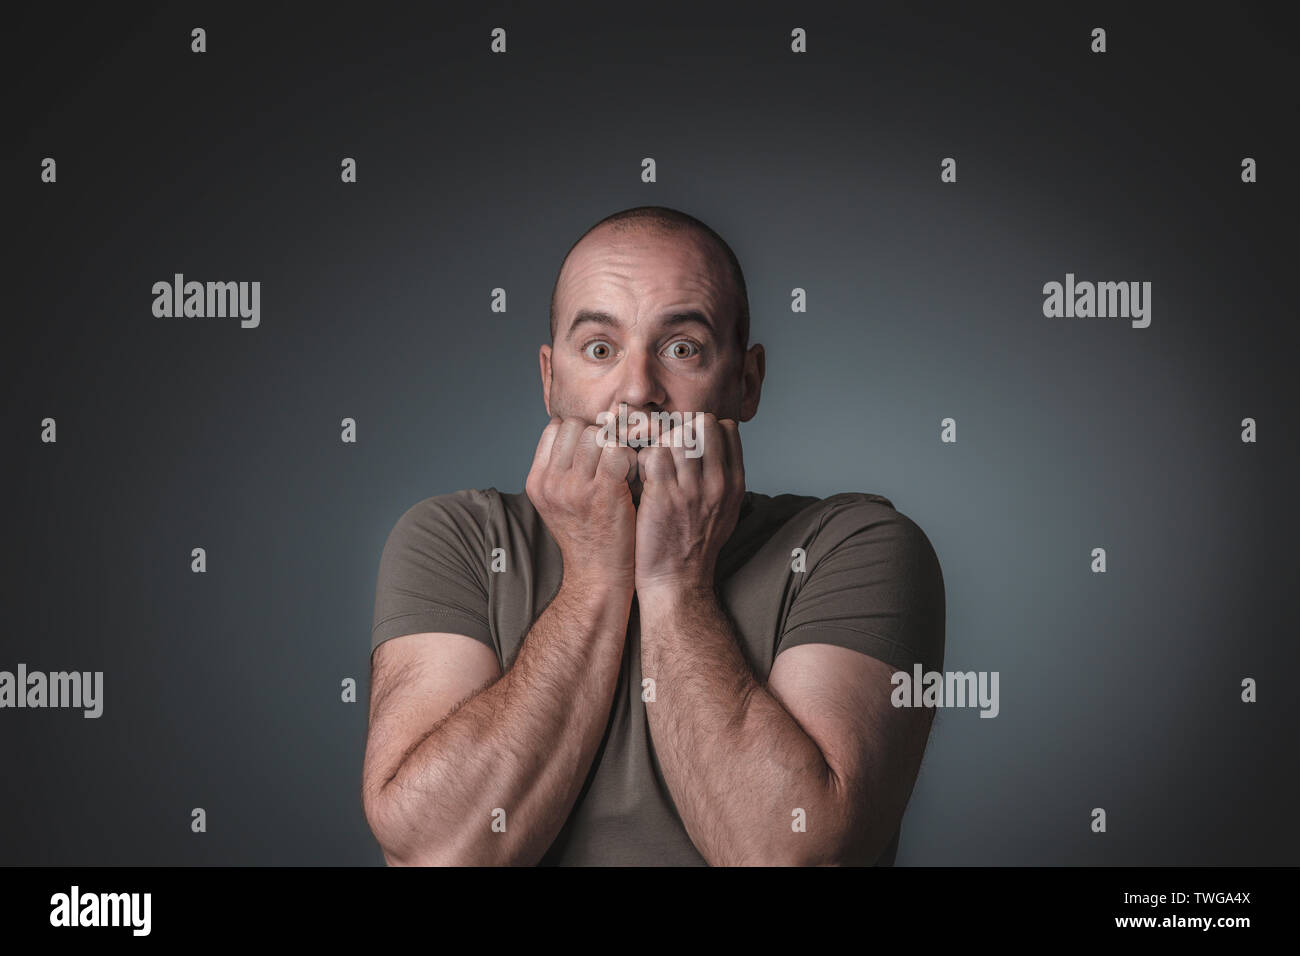 portrait of caucasian man with scared expression bringing his hands to his face, studio shot. Stock Photo